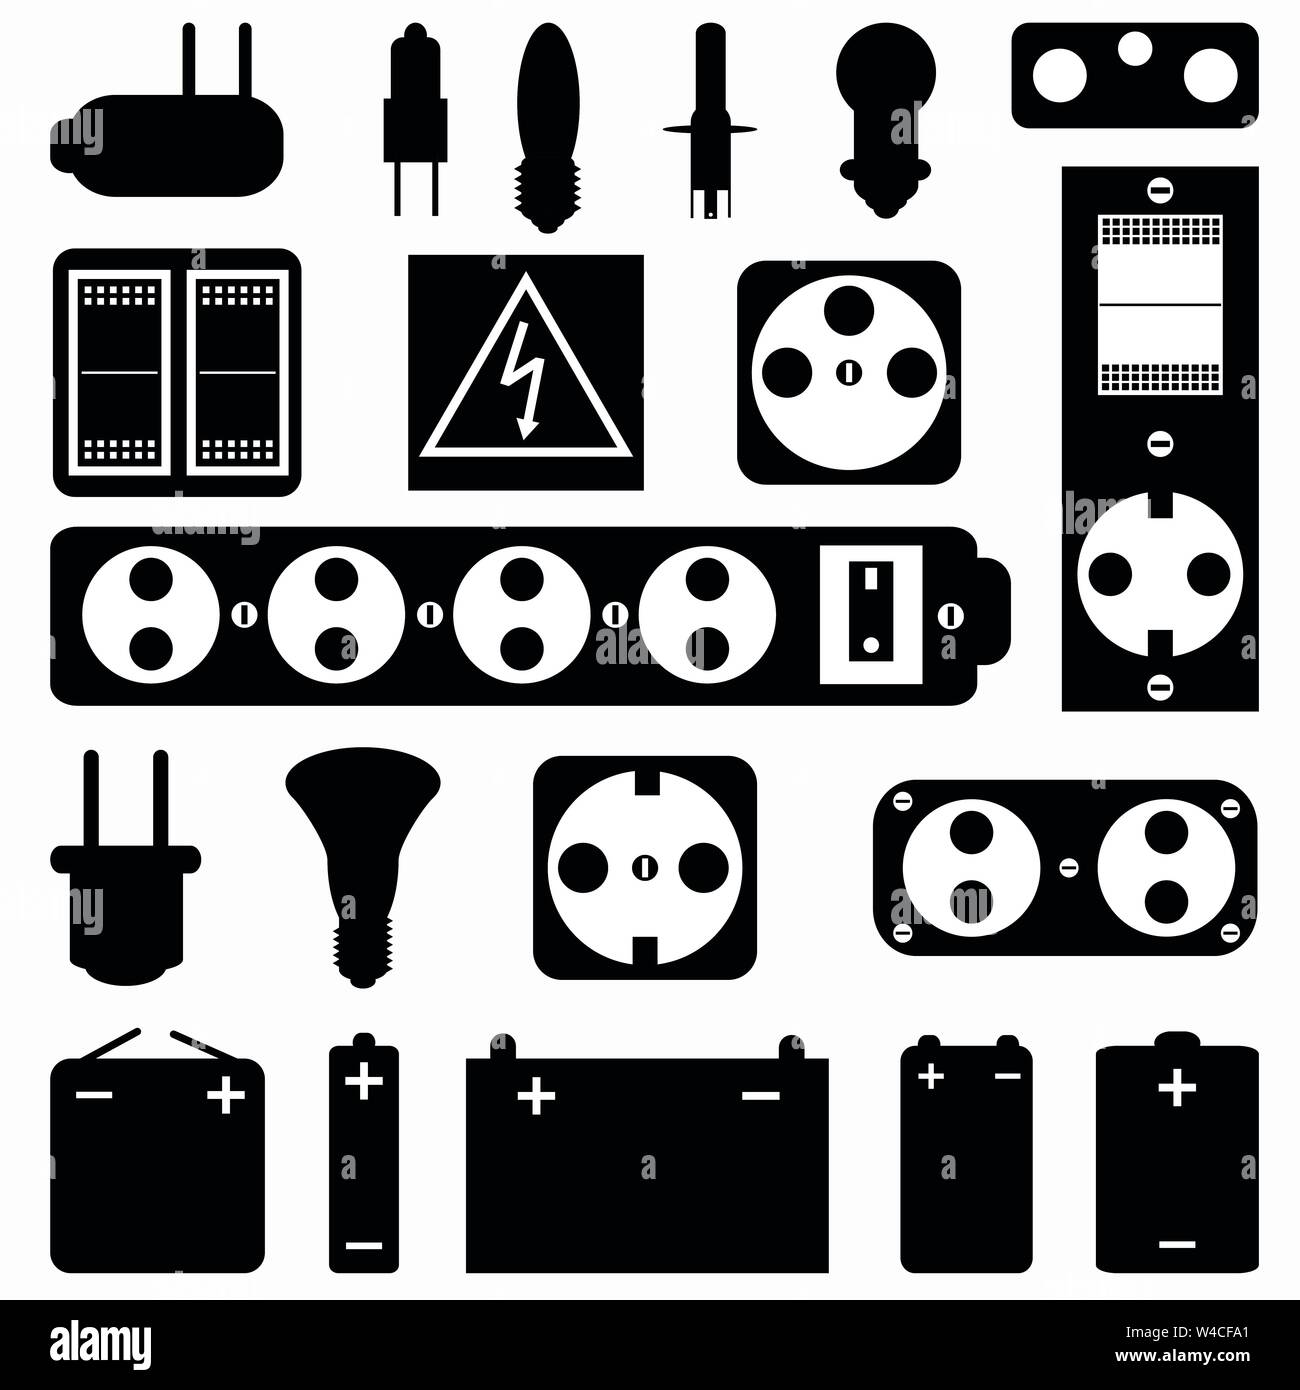 electrical equipment monochrome collection of symbols Stock Vector